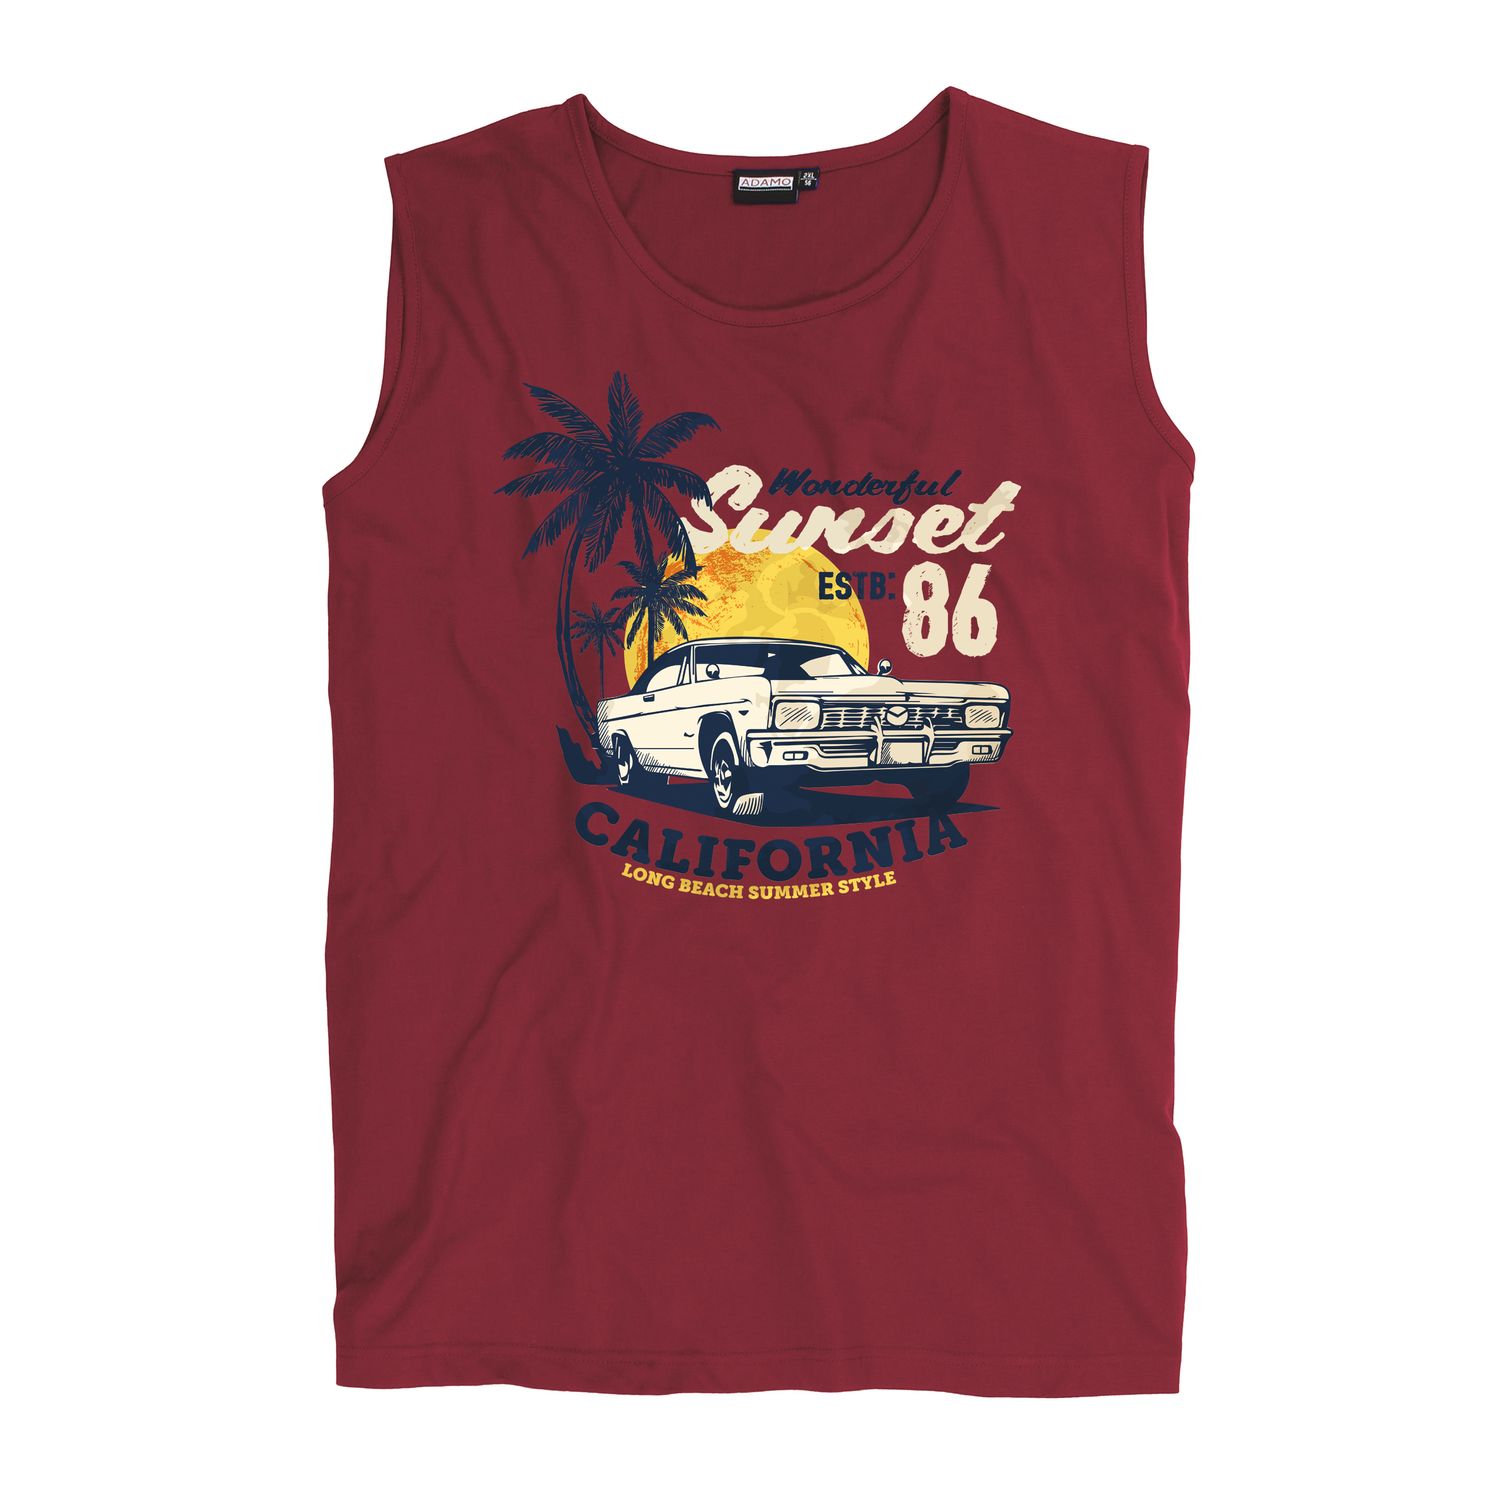 Printed muscle shirt "Sunset" burgundy by ADAMO in sizes 2XL-12XL